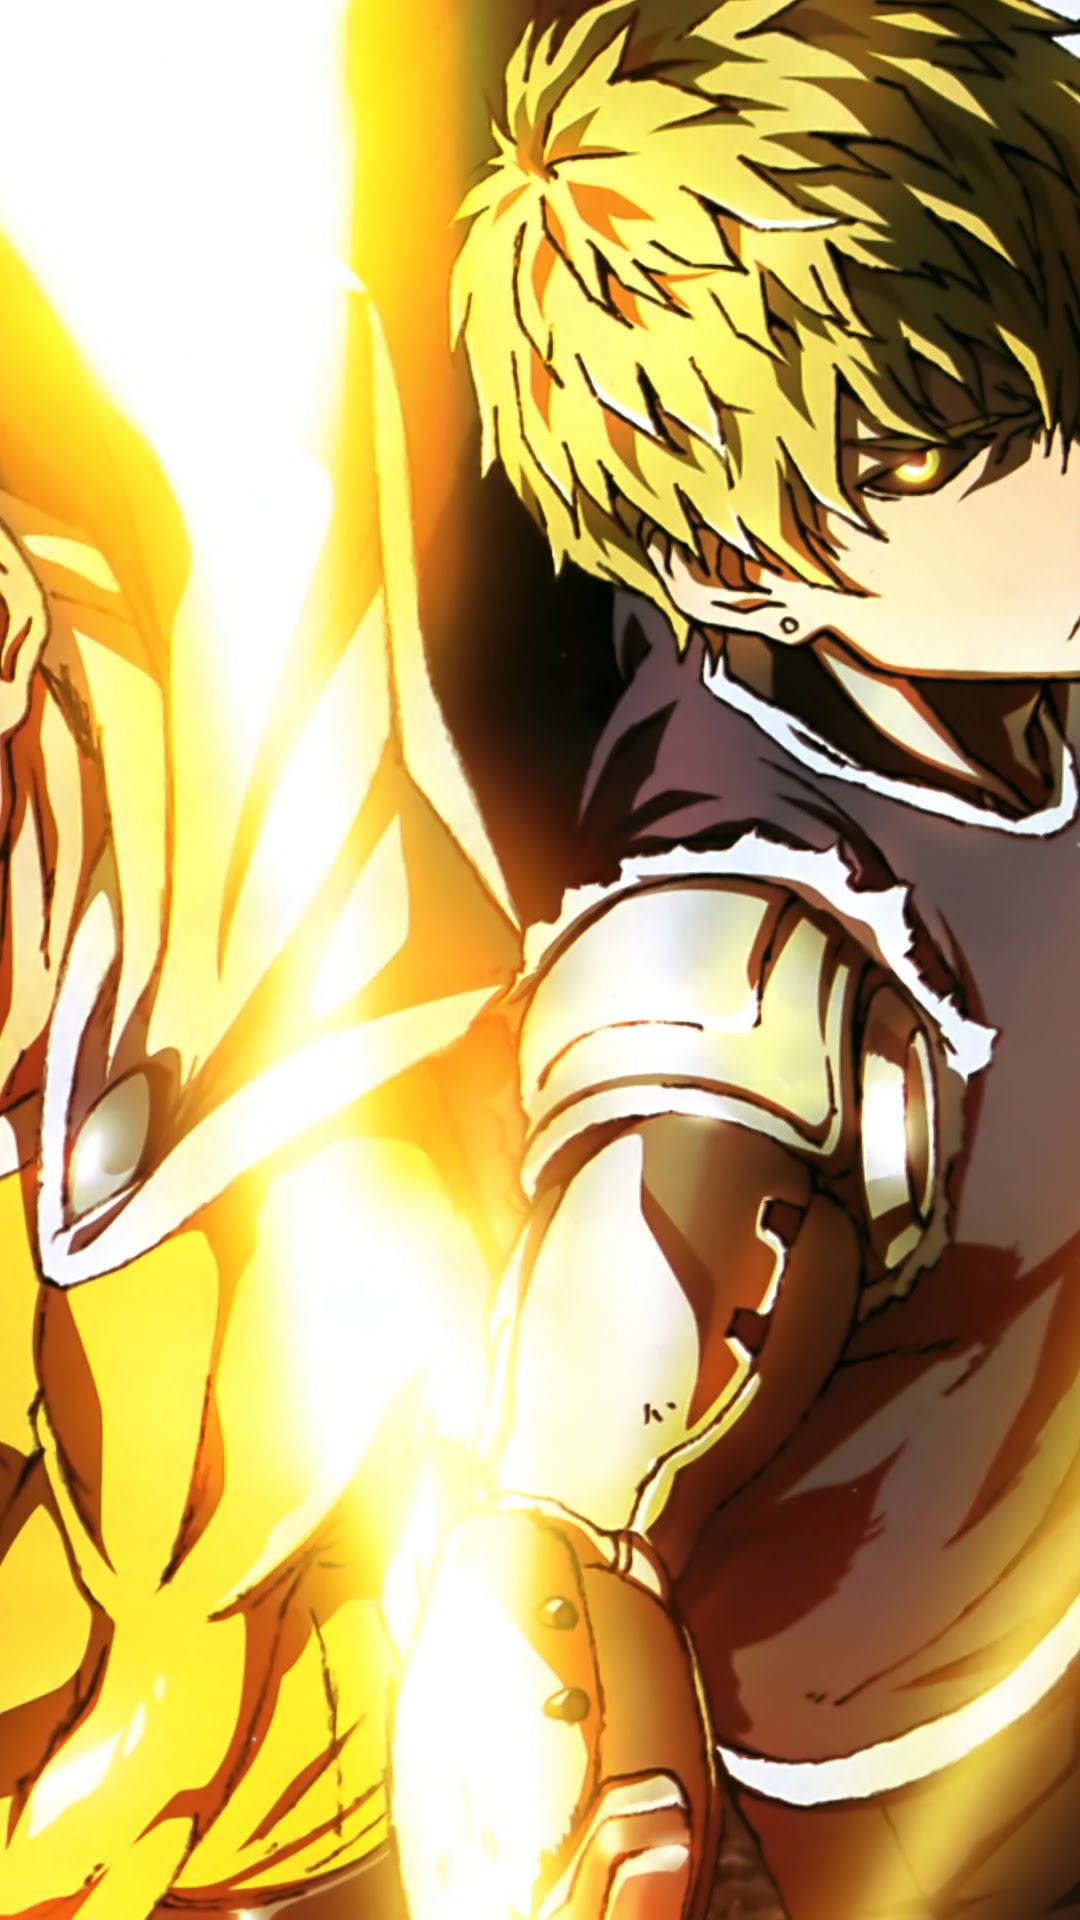 1080x1920 Saitama And Genos One Punch Man Iphone 10 7 6s 6 Hd Wallpaper Image Background Photo And Picture Hd Wallpaper